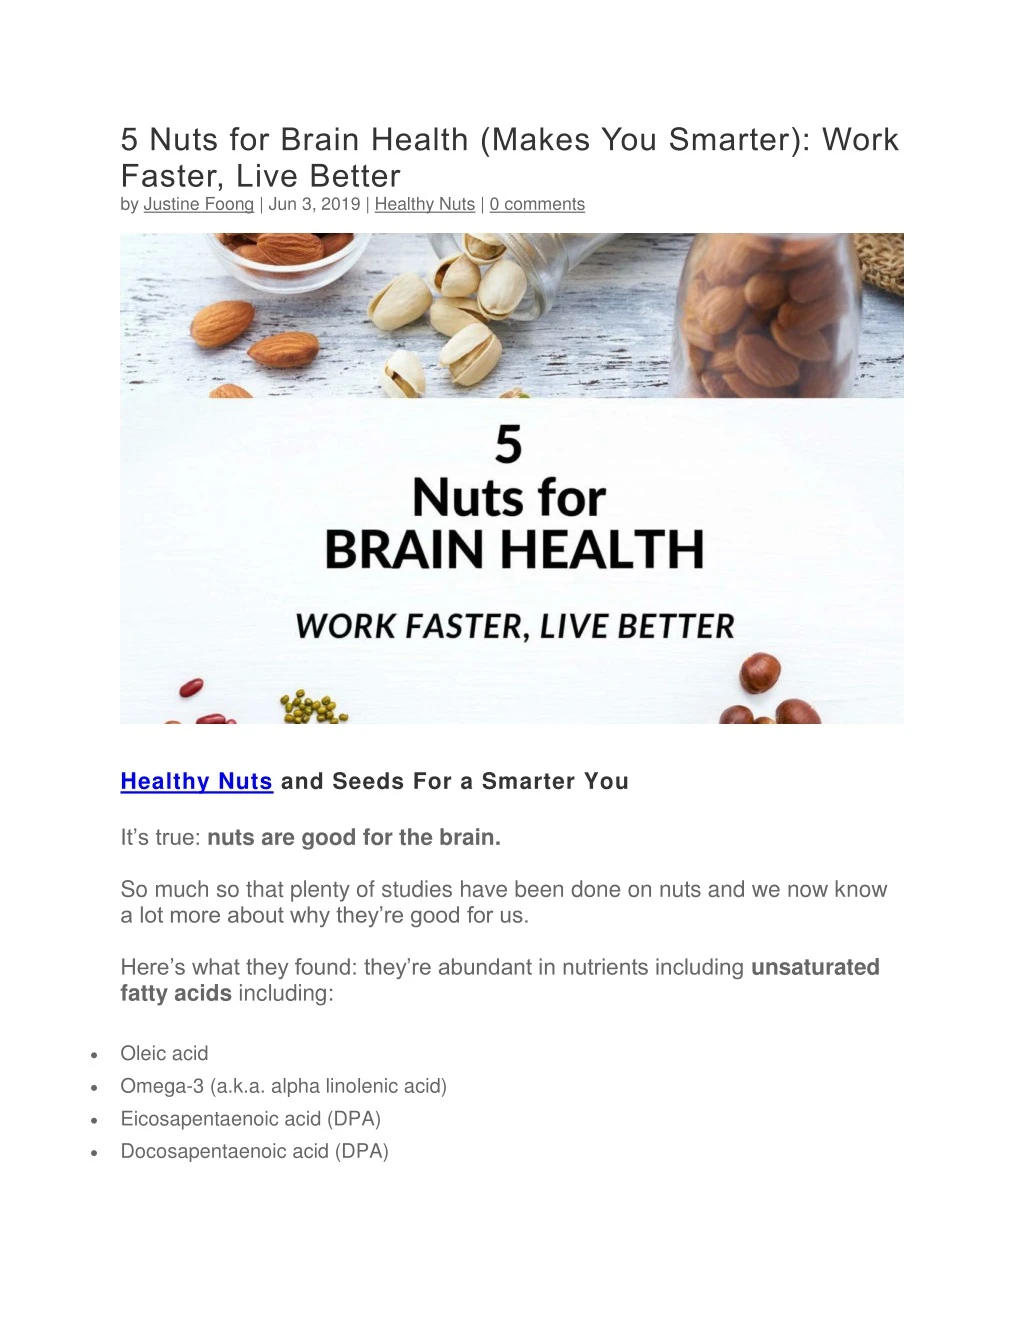 5 nuts for brain health makes you smarter work